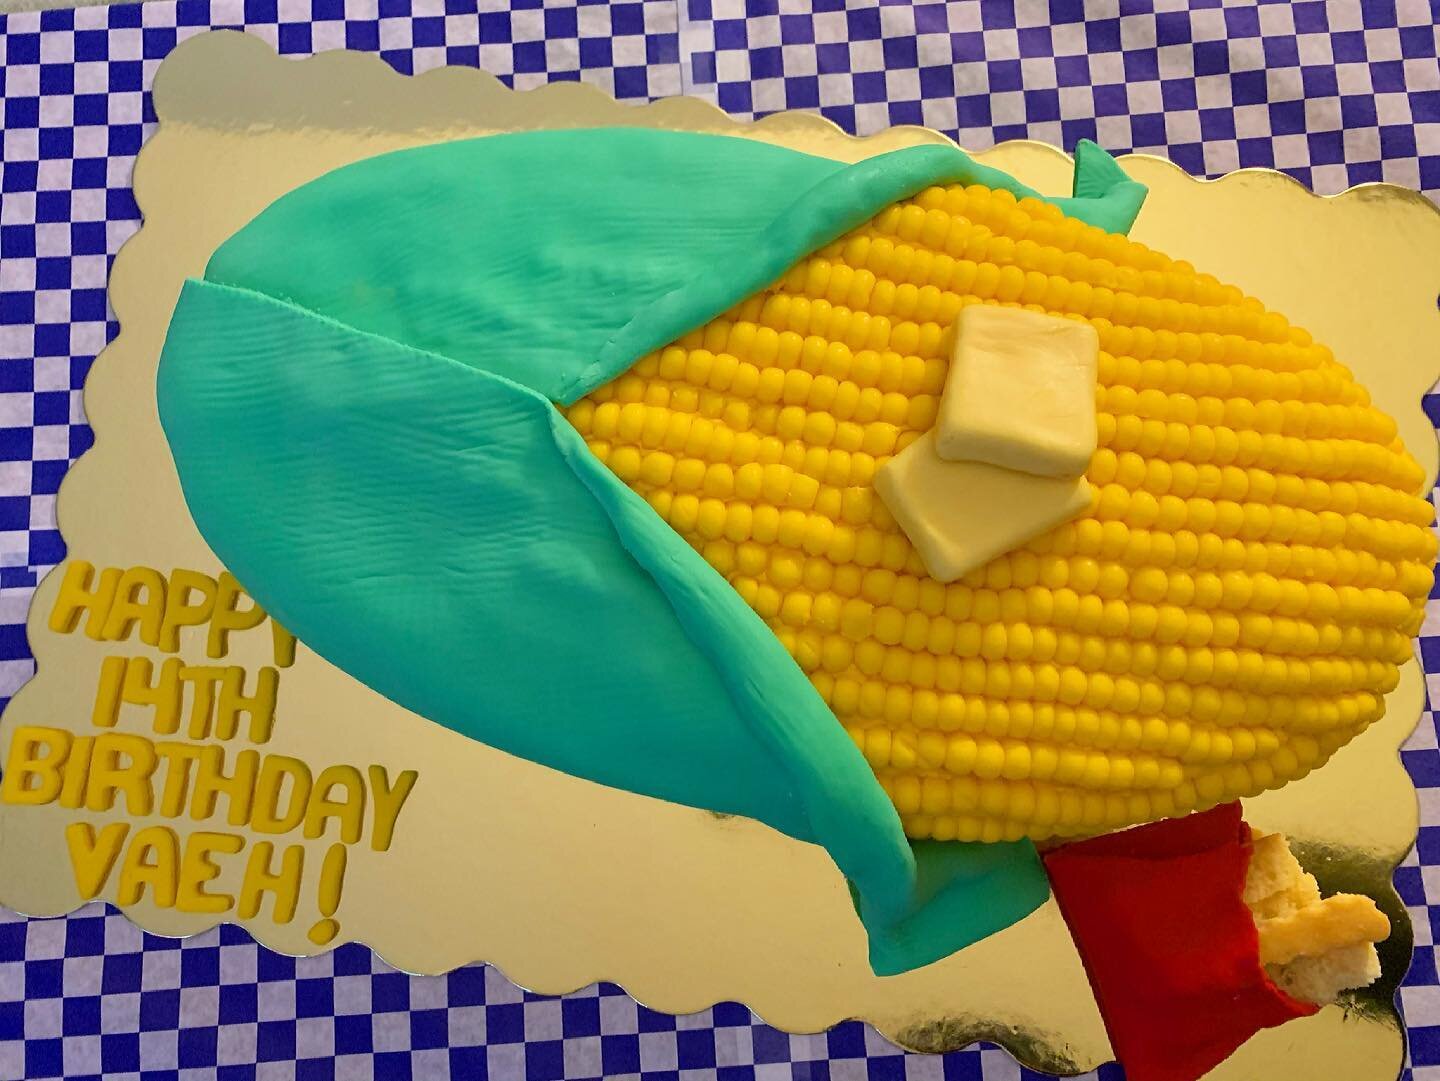 Spring is here! So you know what that means, It&rsquo;s almost #cookout season. This 🌽 cake was really fun one to make! The best part about this corn on the cob is no greasy fingers! 😂 
-
-
-
#cake #cakedecorating #cakesofinstagram #cakestagram #co